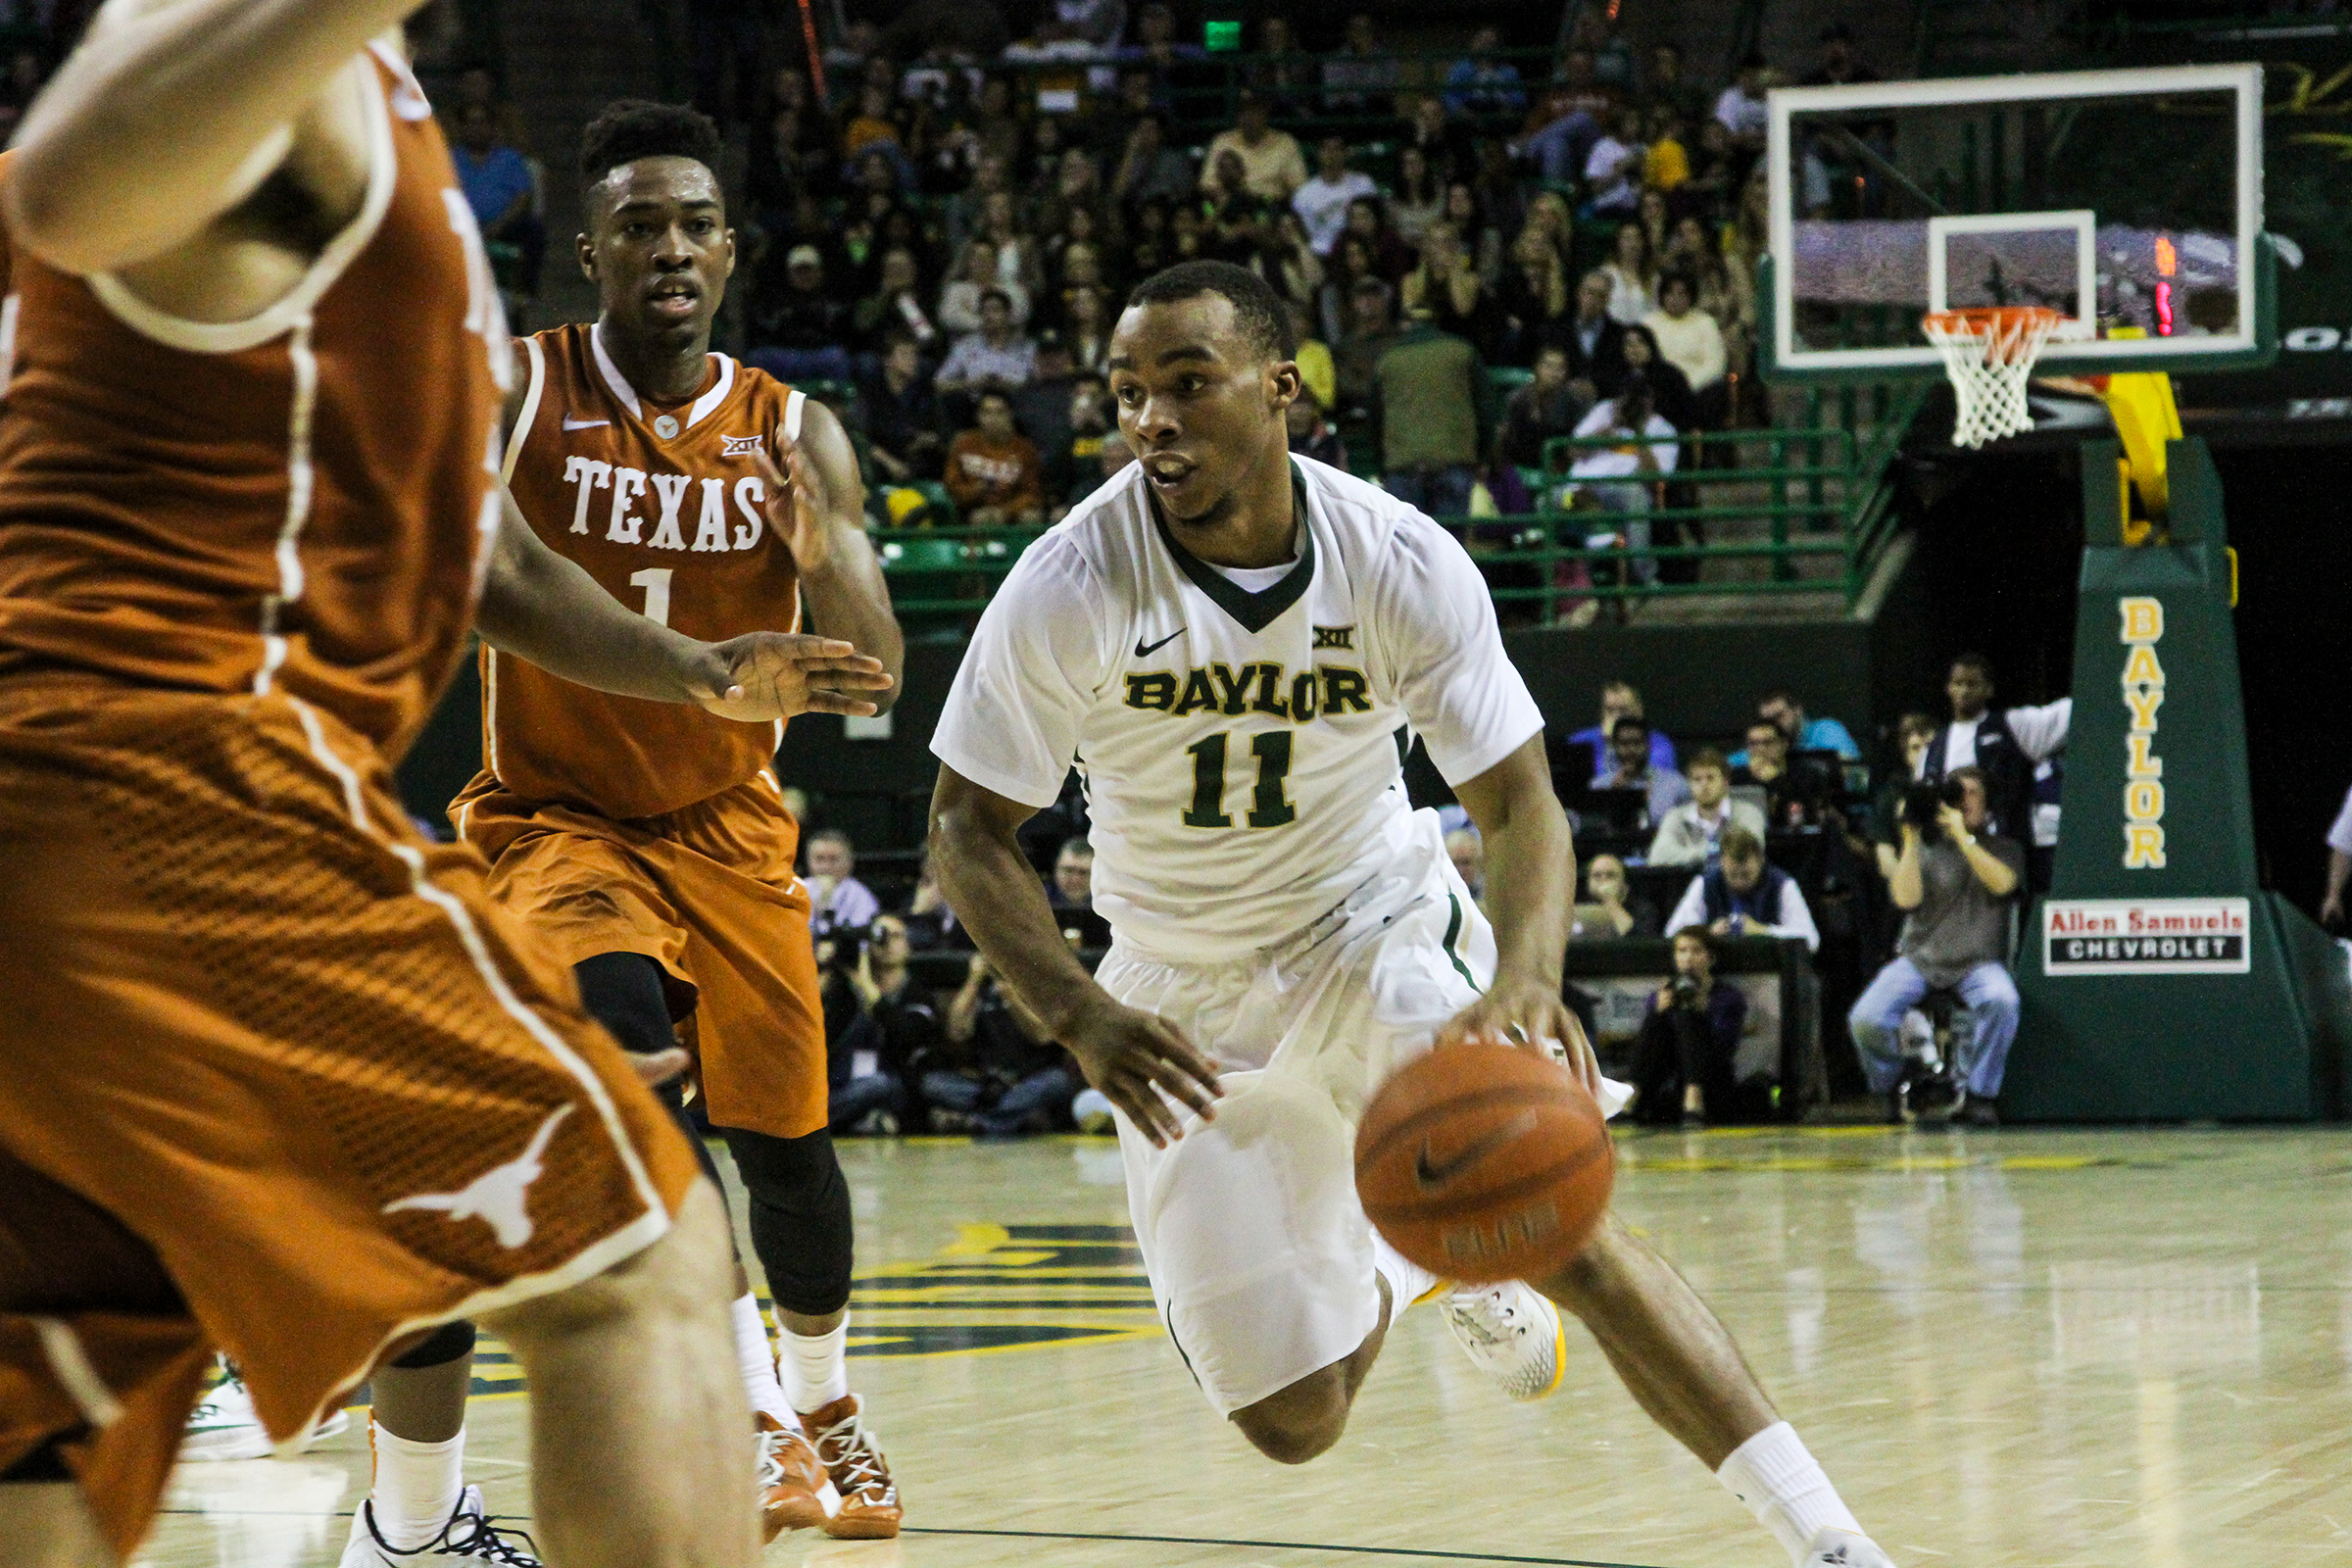 Junior guard Lester Medford drives against Texas during Baylor's 83-60 win over the Longhorns on Jan. 31. The Bears will play their first tourney game at 12:40 p.m. Thursday on TBS. 